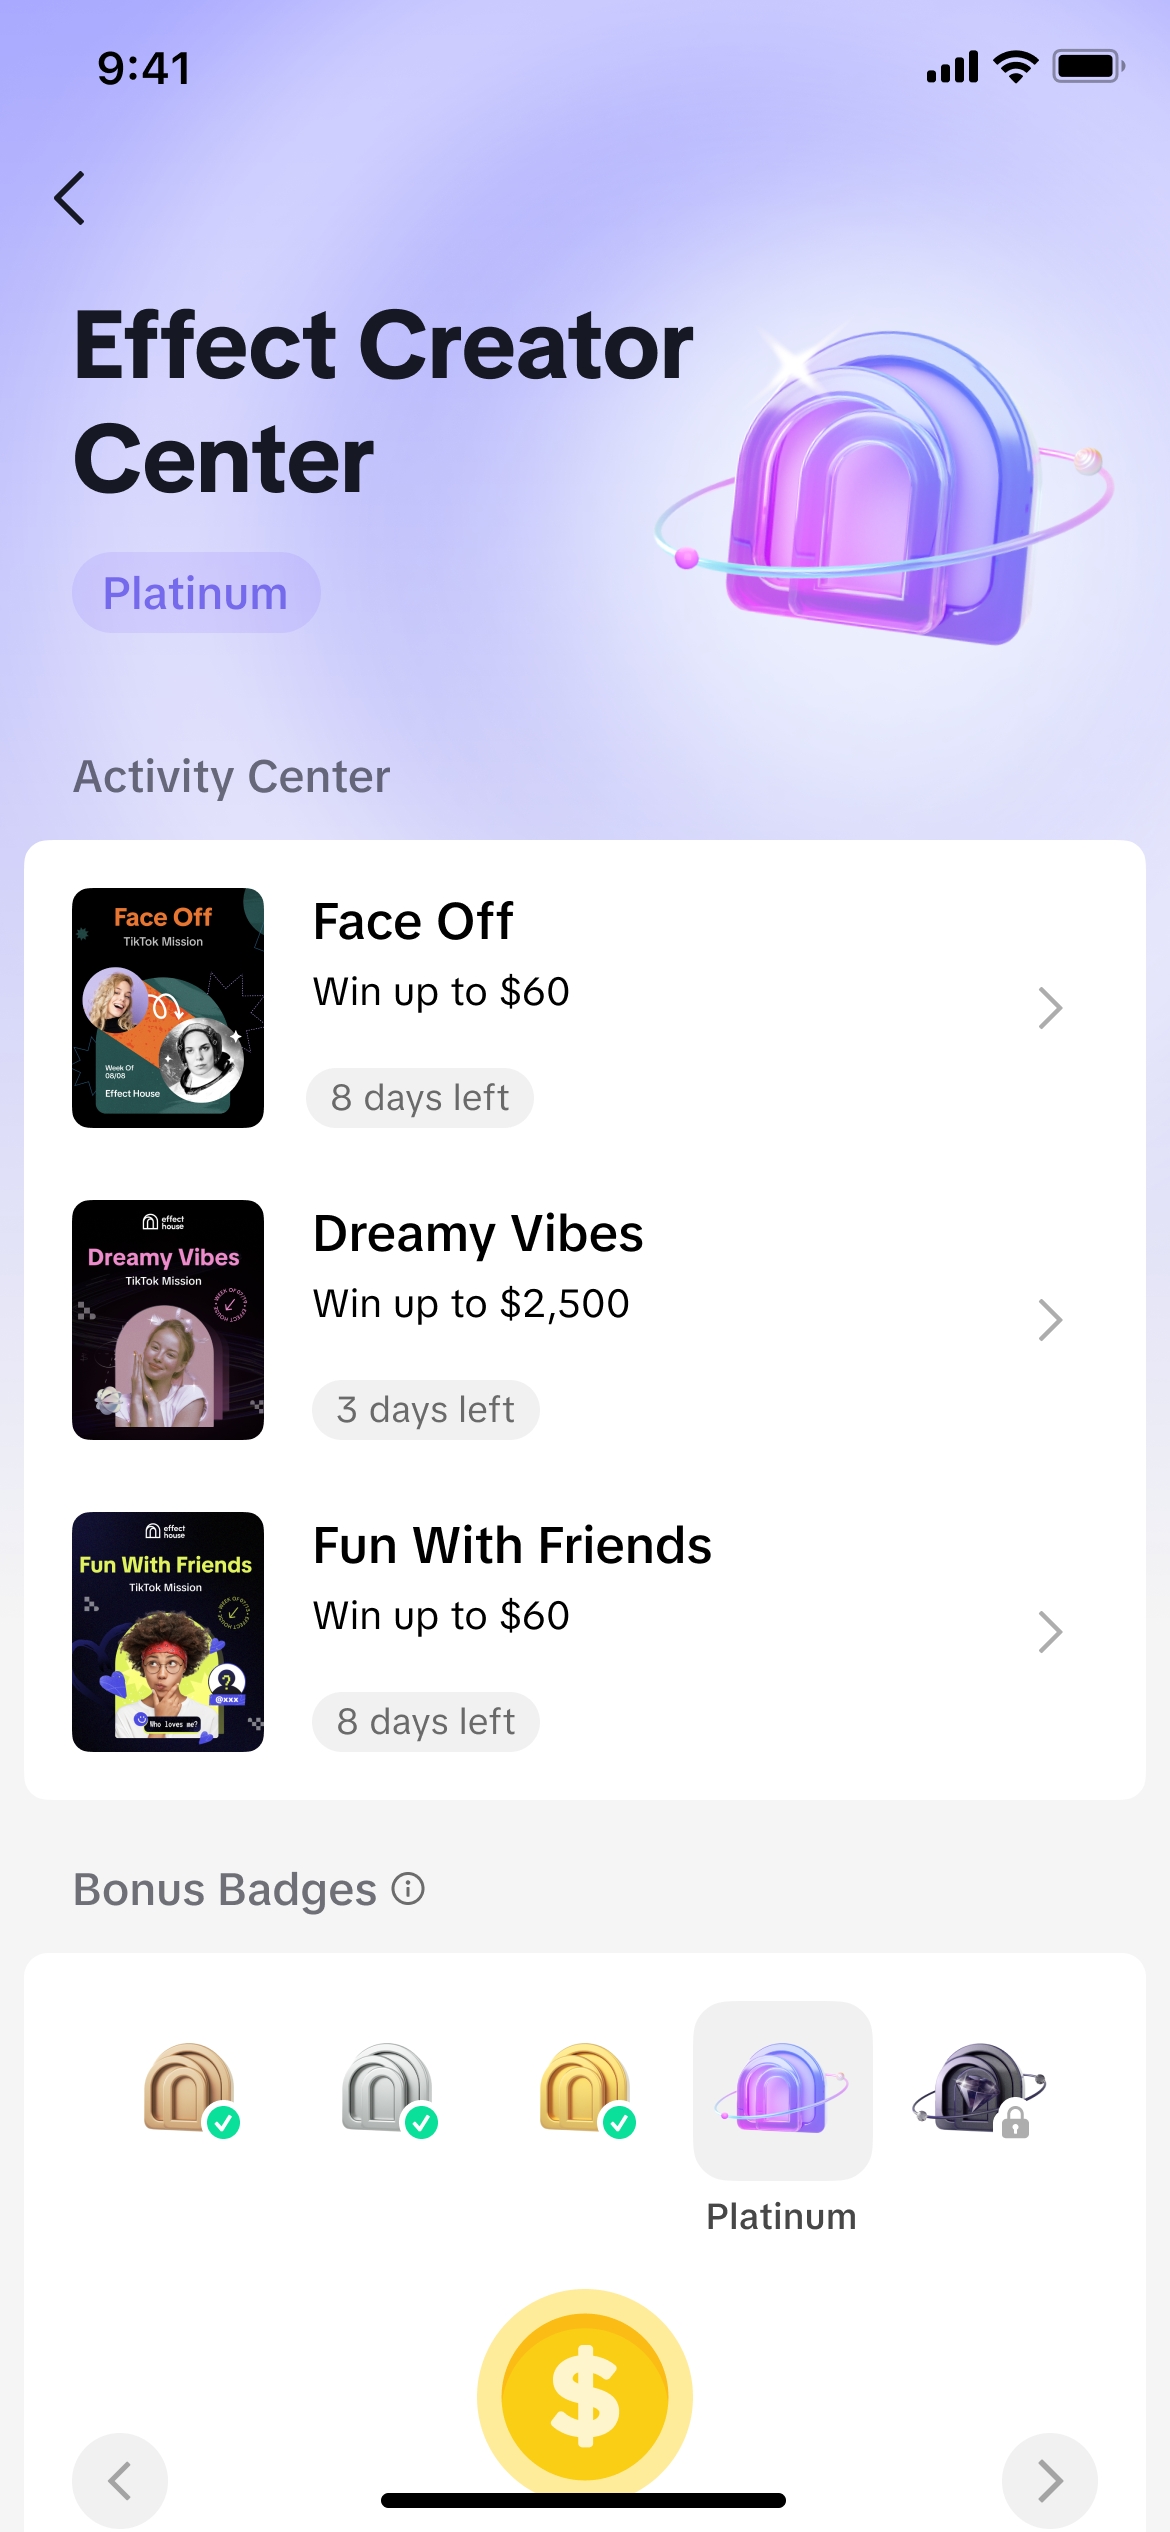 Effect Creator Center full overview, including Activity Center, Bonus Badges, and Analytics